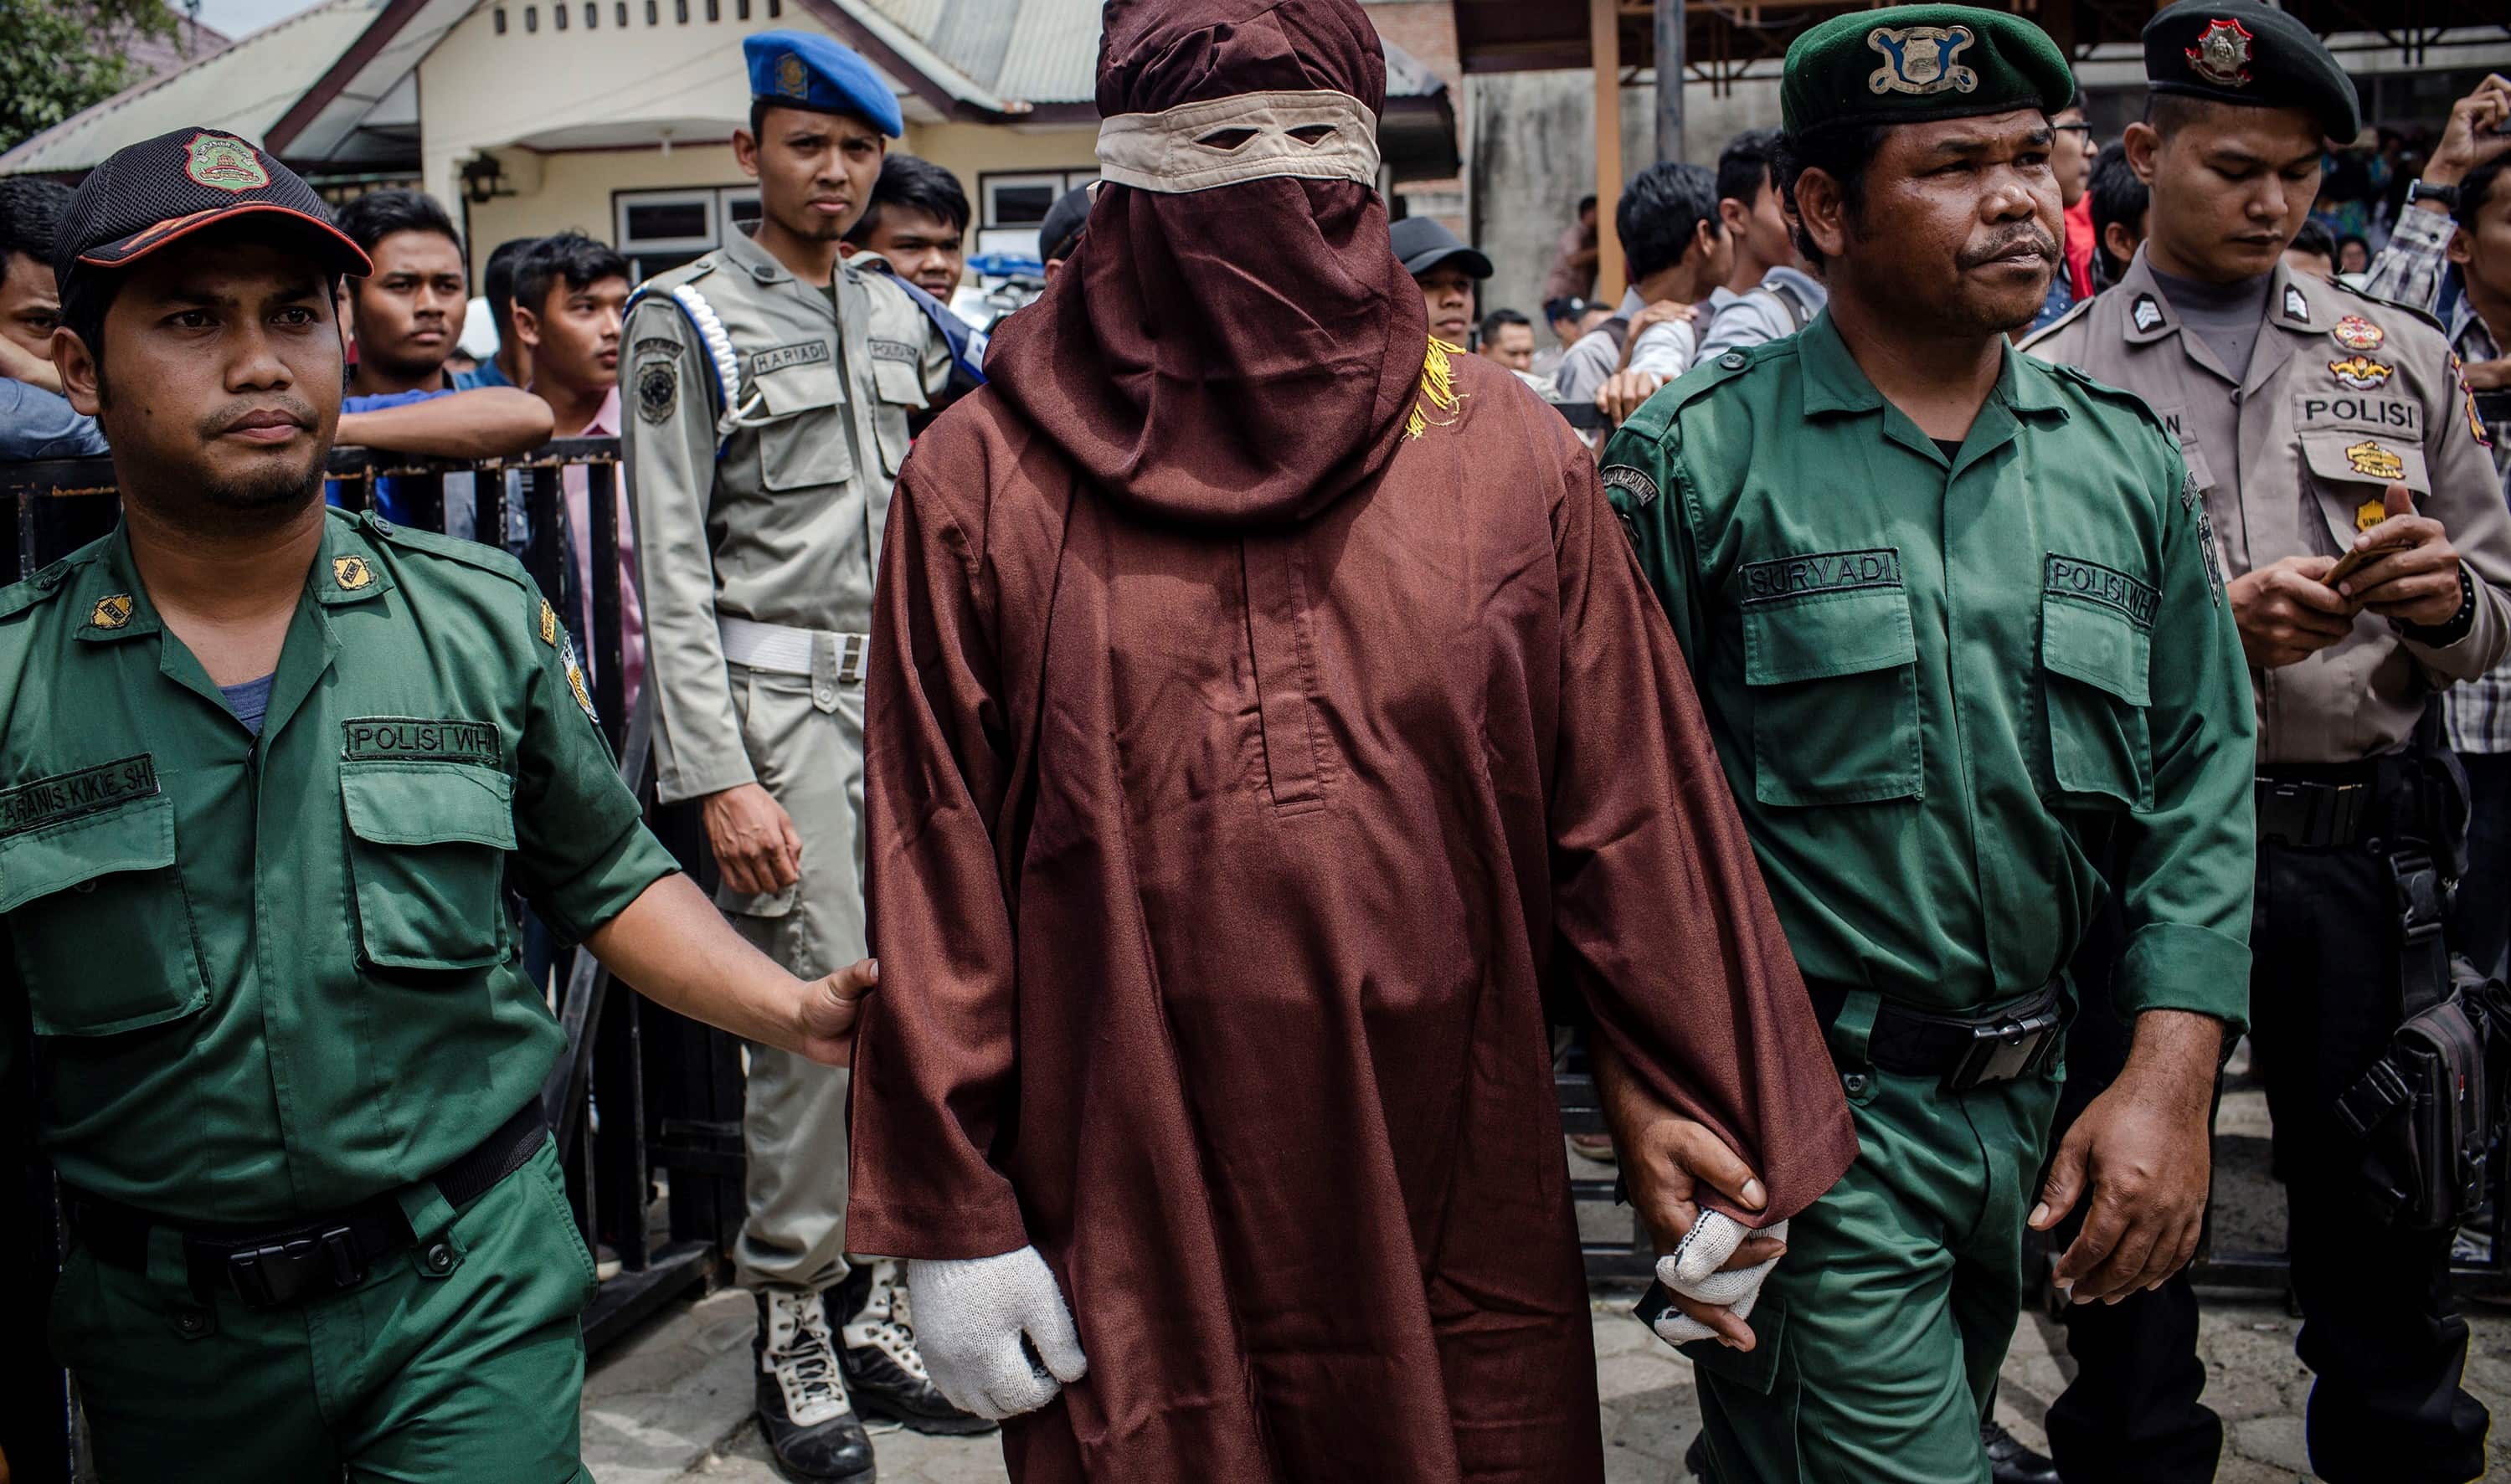 A judicial executor known as an 'algojo' stands by before a public caning in Aceh, Indonesia, March 2017 (Photo: Ulet Ifansasti/Getty Images)